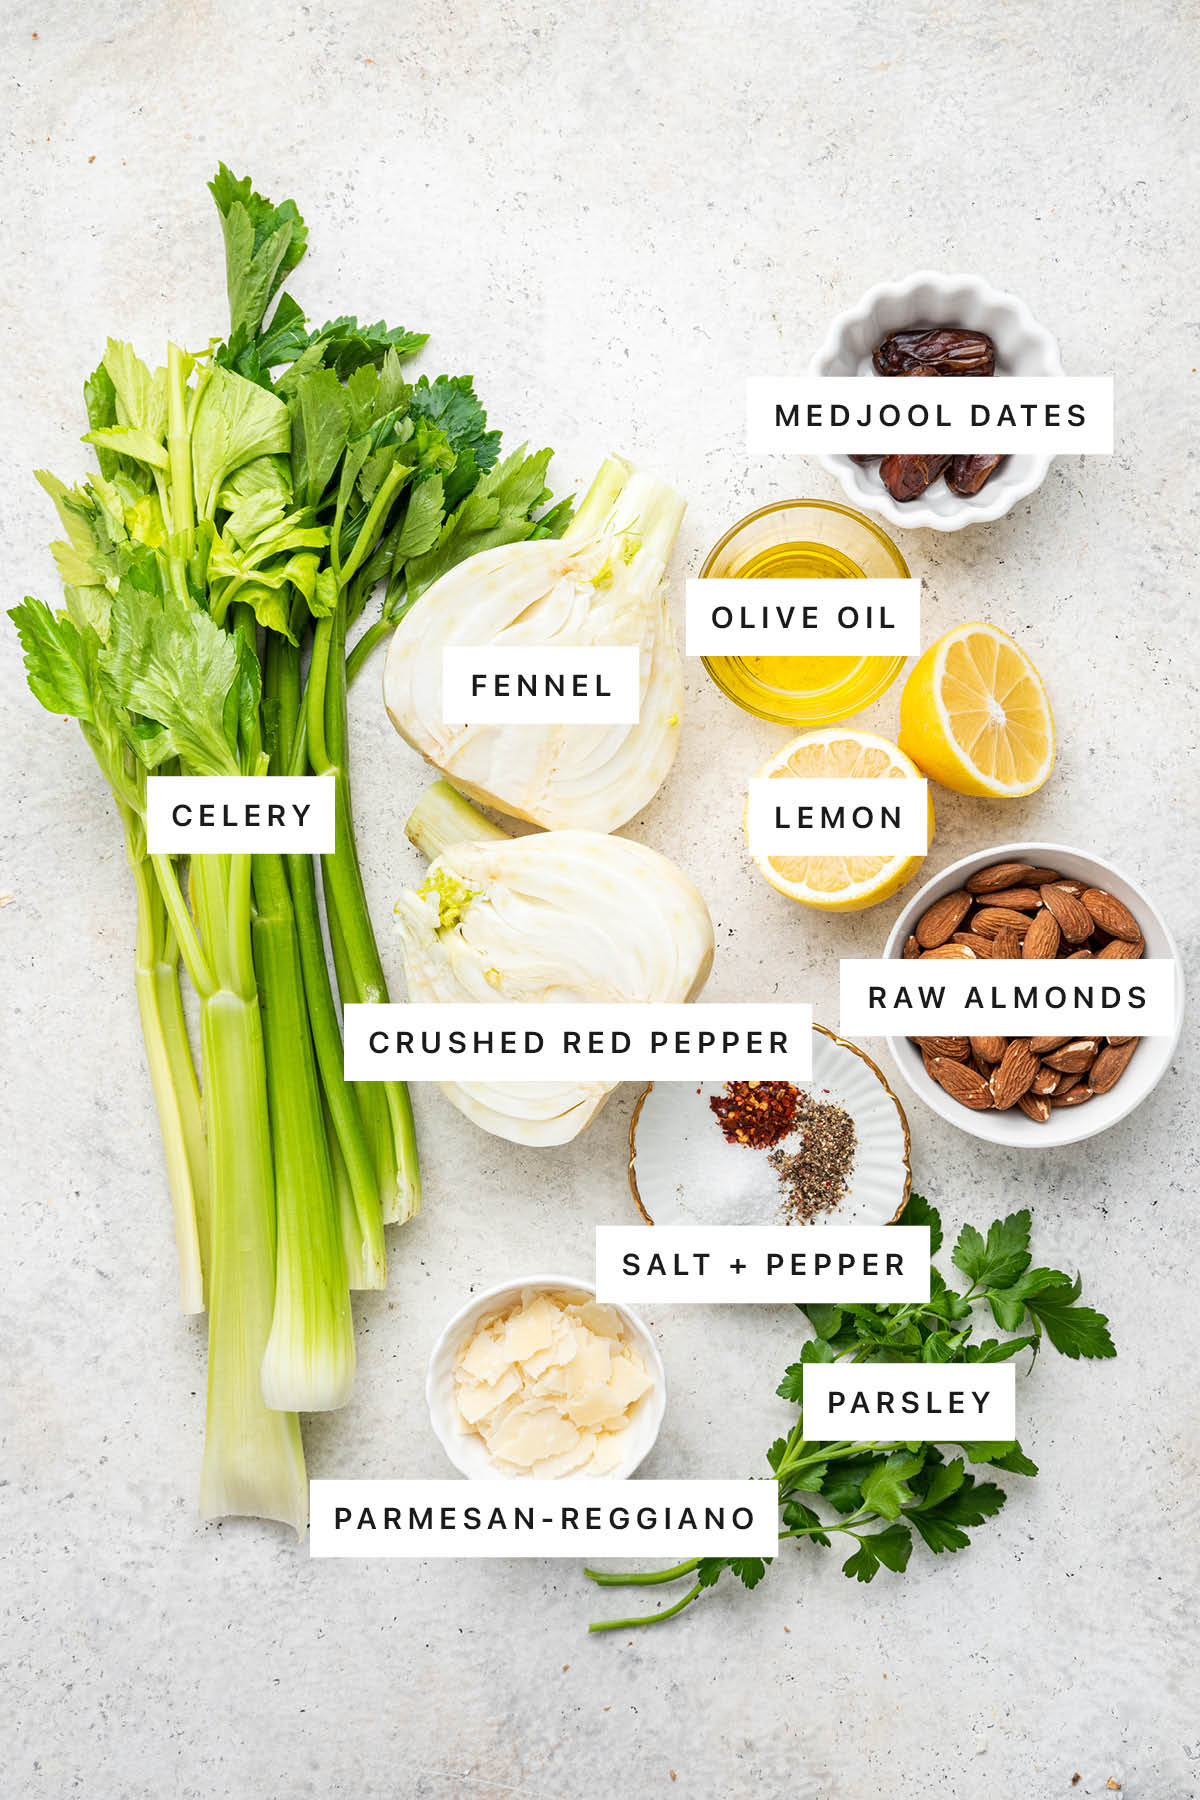 Ingredients measured out to make Fennel and Celery Salad: celery, fennel, olive oil, medjool dates, lemon, raw almonds, crushed red pepper, salt, pepper, parsley and parmesan-reggiano.